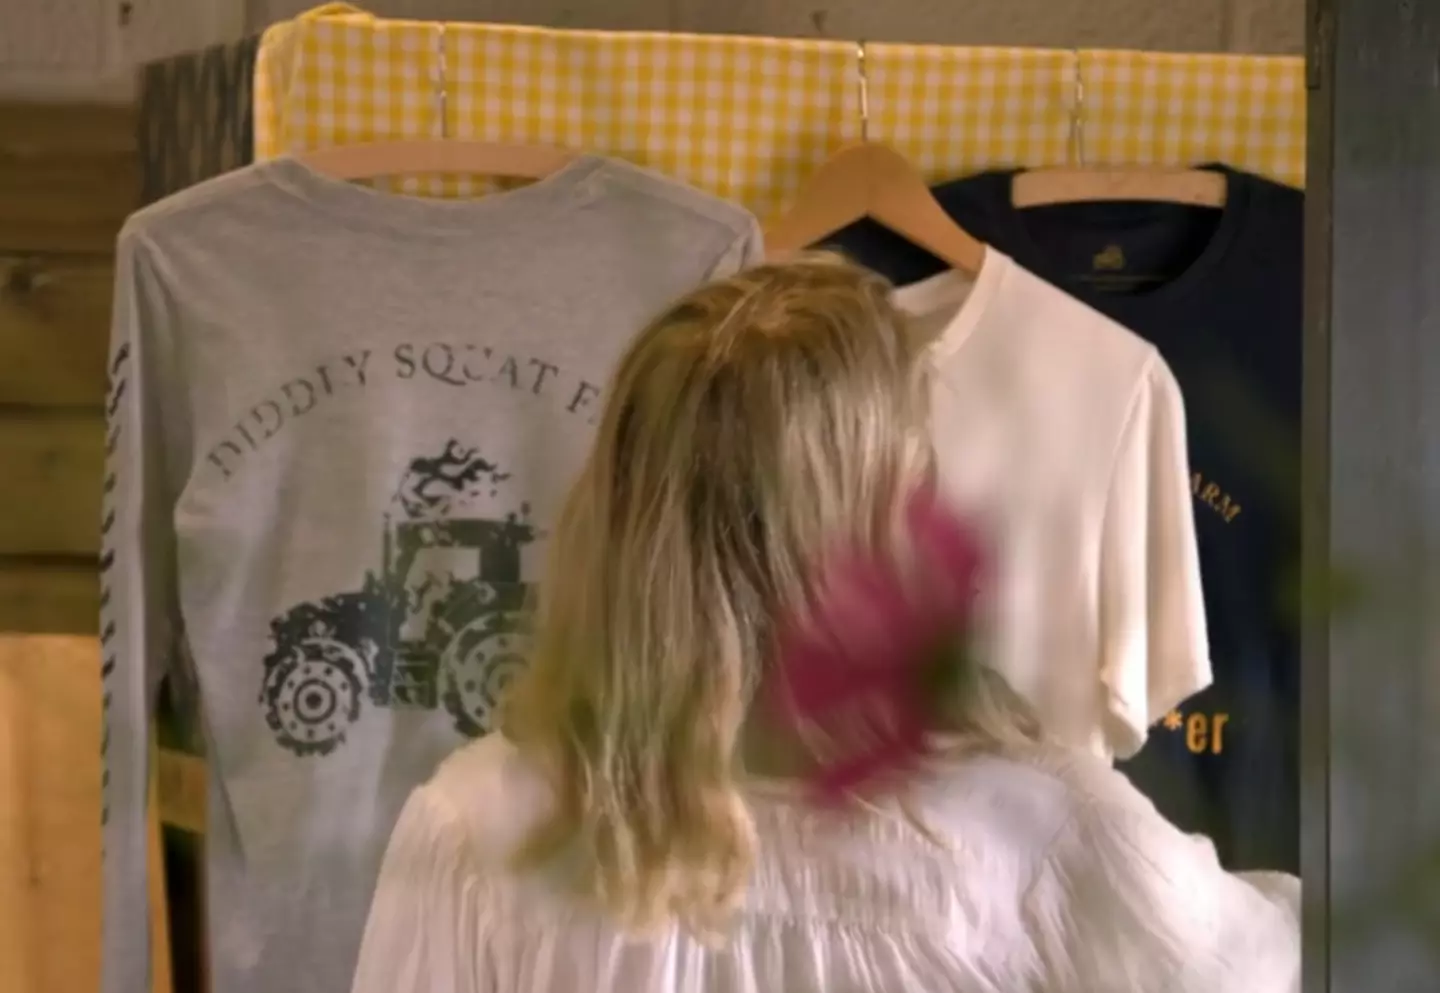 Lisa taking the price signs off of the t-shirts. (Prime Video)